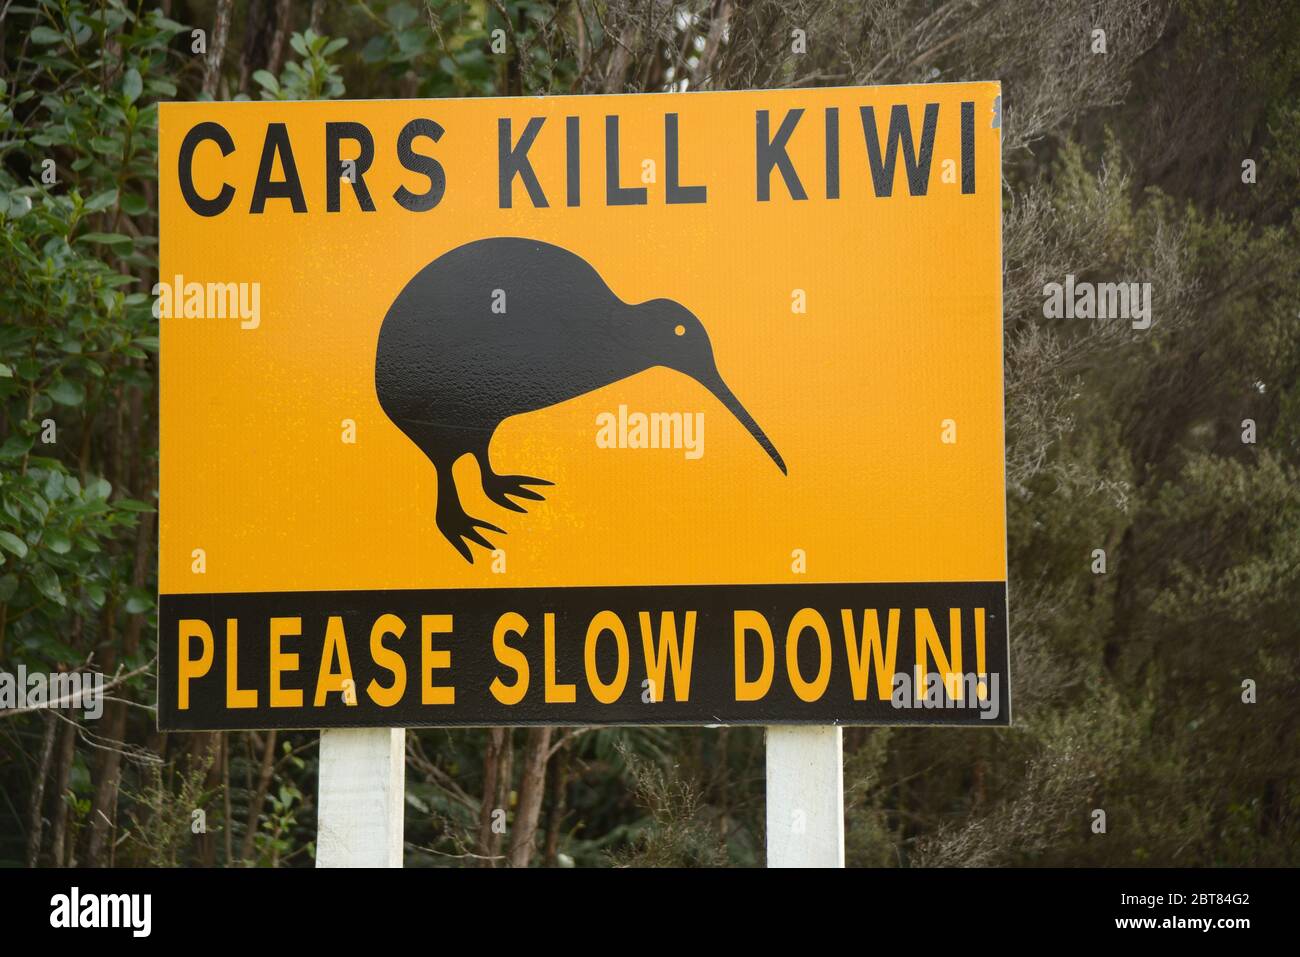 A road sign warns drivers to beware of Kiwi as they drive into Okarito in New Zealand's South Island Stock Photo